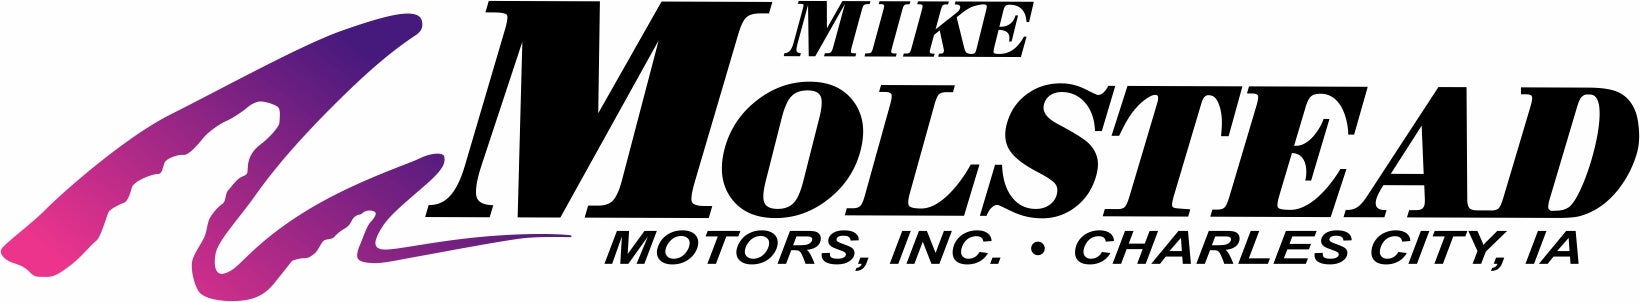 Mike Molstead Ford Charles City, IA